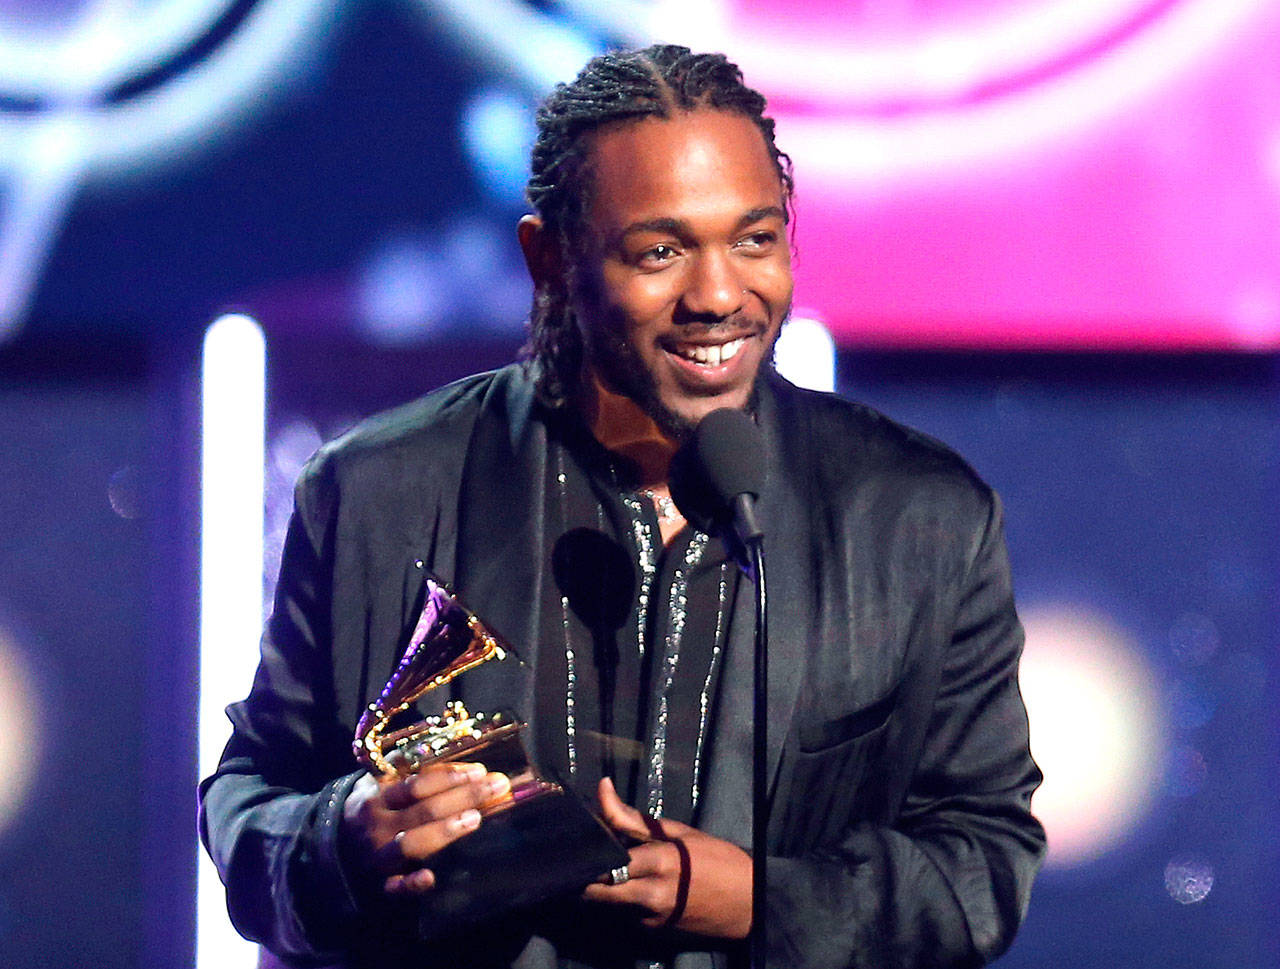 Rapper Kendrick Lamar accepts the award for best rap album for “DAMN.,” at the 60th annual Grammy Awards in New York on Jan. 28. On Monday, Lamar won the Pulitzer Prize for music for the album.” (Photo by Matt Sayles/Invision/AP, File)